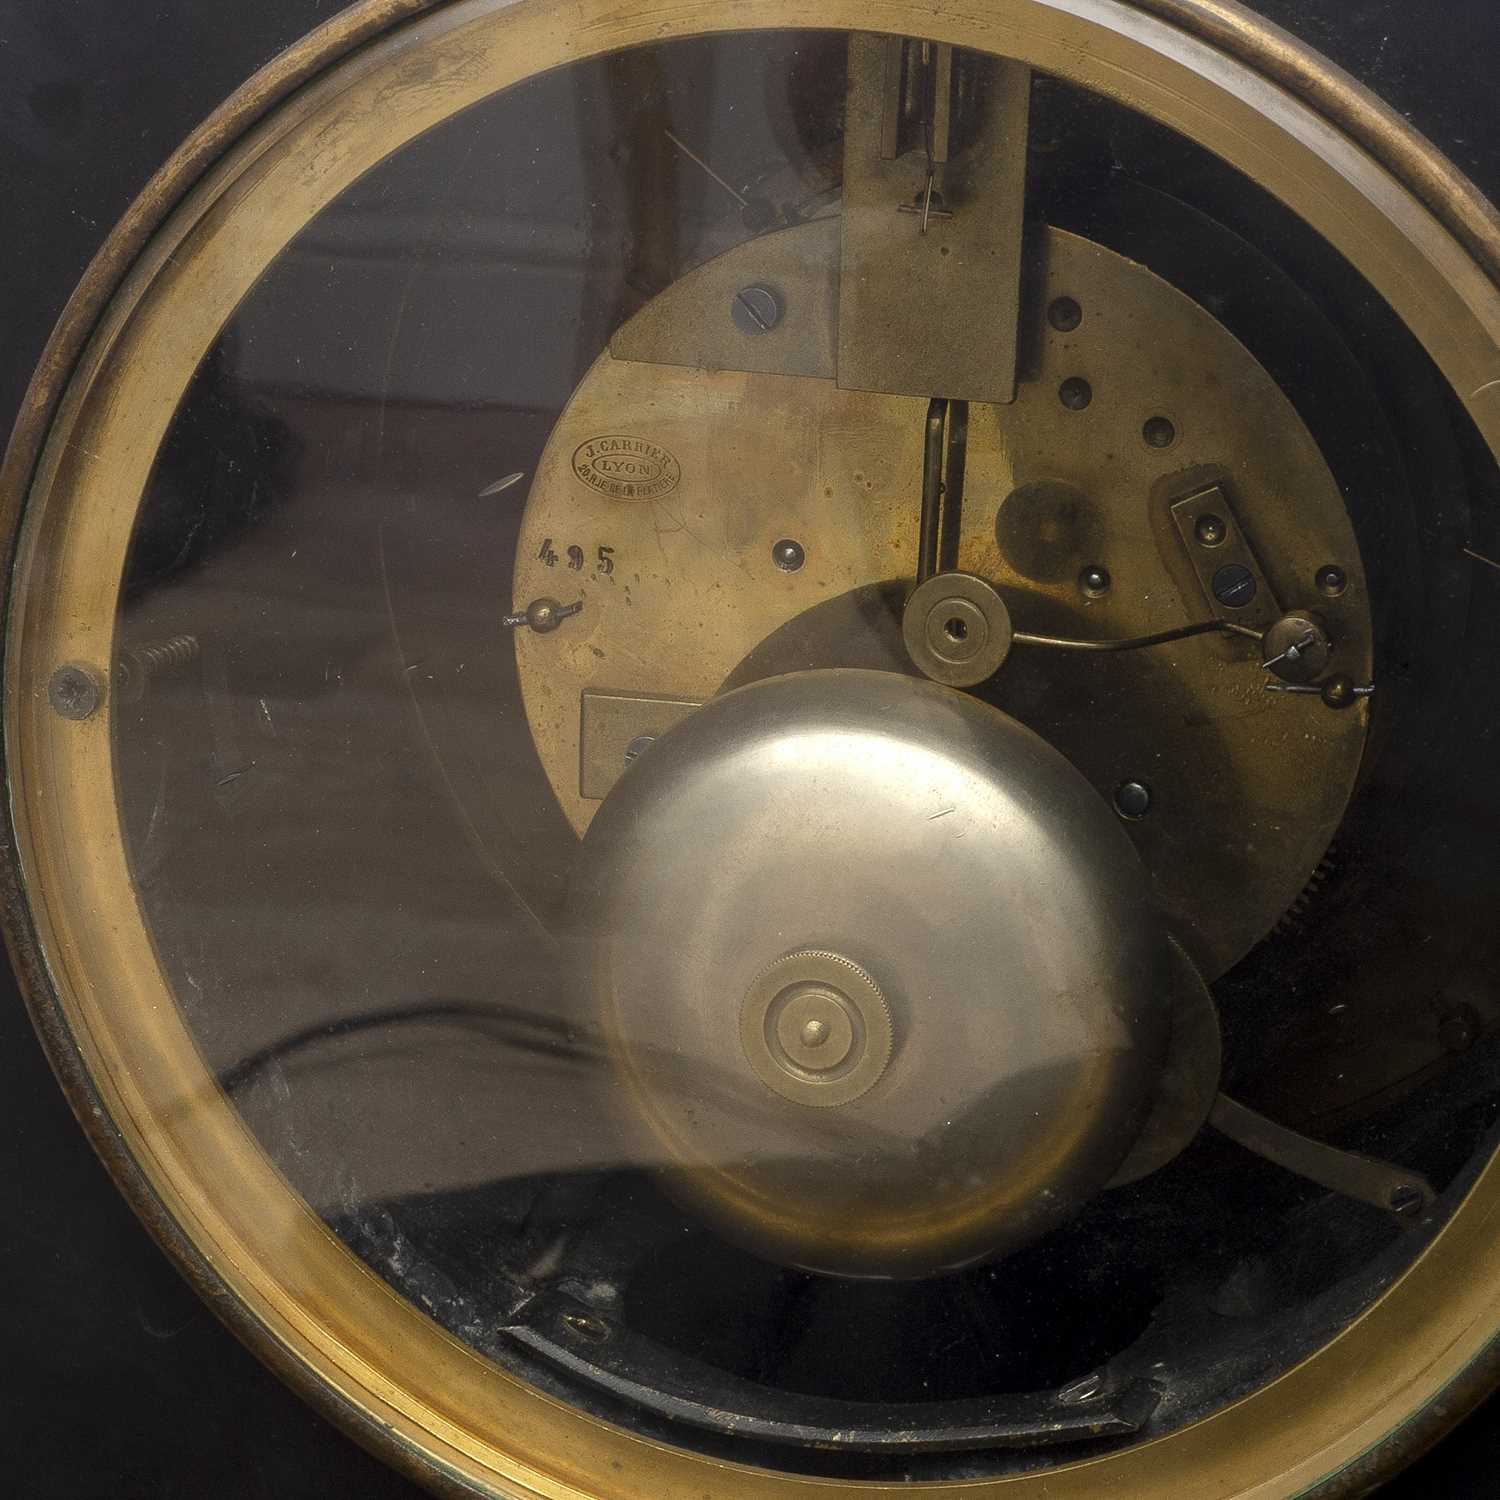 AN IMPRESSIVE 19TH CENTURY FRENCH PERPETUAL CALENDAR CLOCK WITH MOONPHASE AND BAROMETER - Image 6 of 6